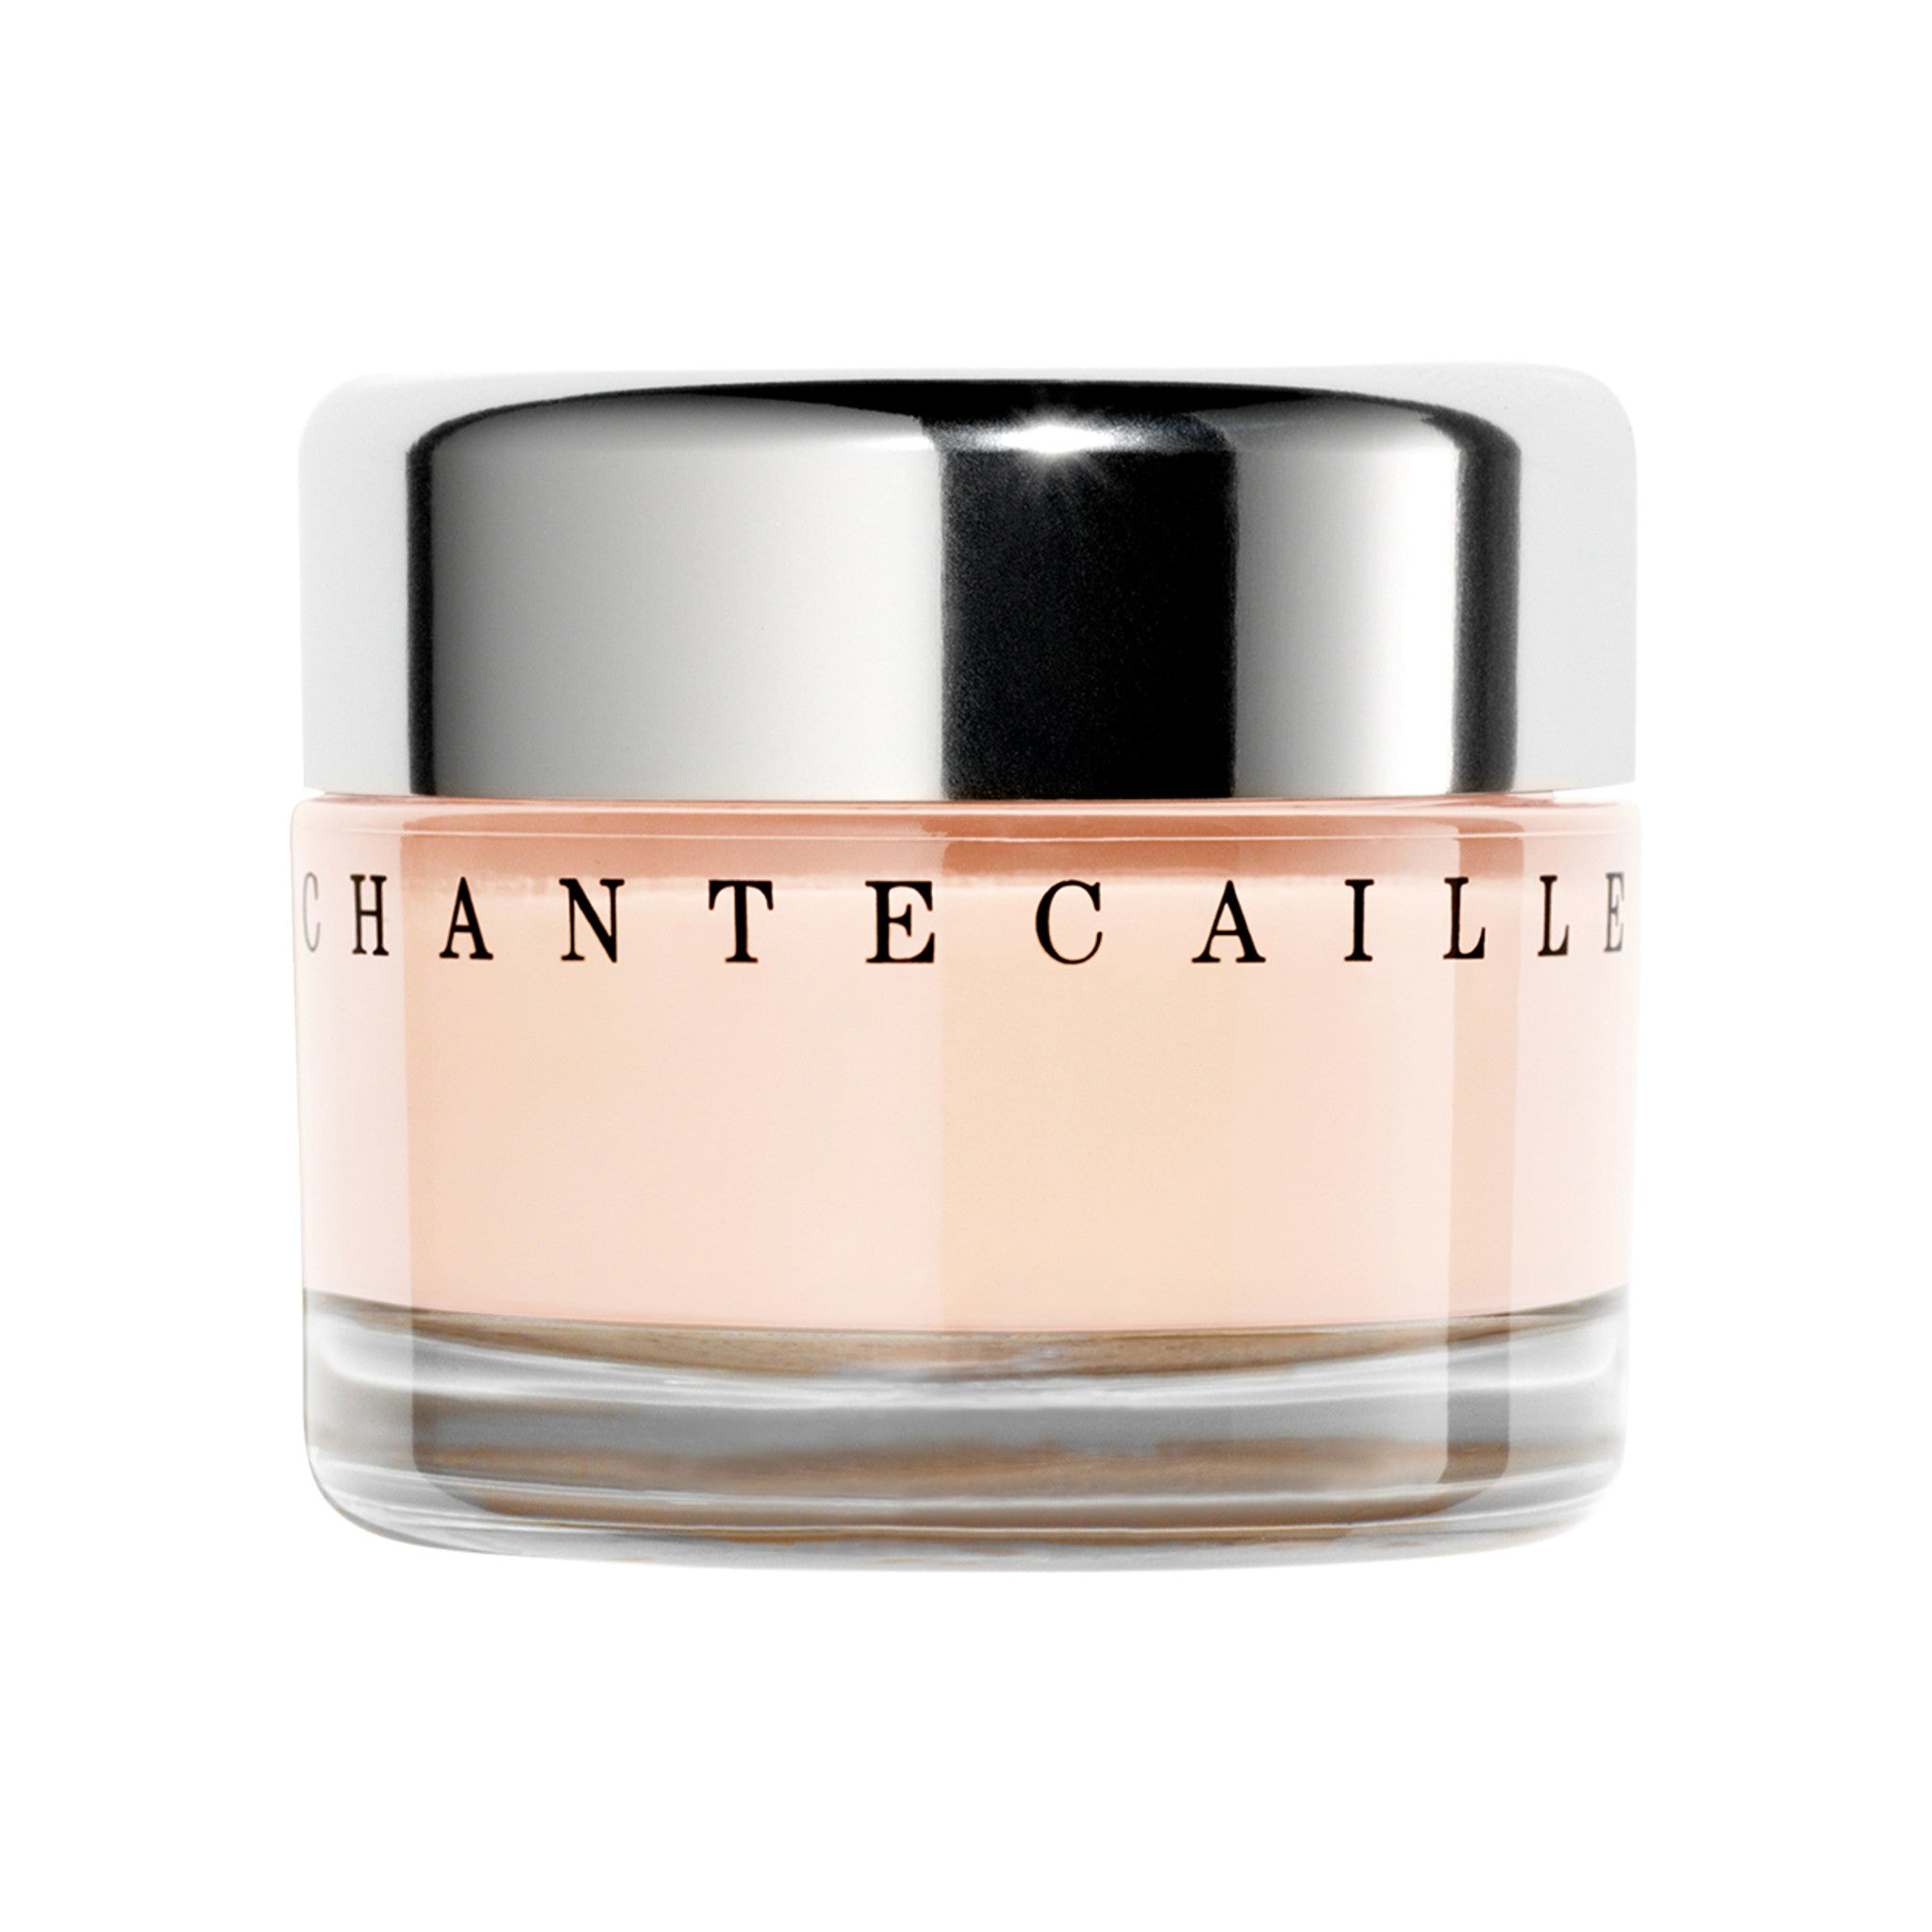 Chantecaille Future Skin Foundation Color/Shade variant: Aura main image. This product is for light cool pink complexions